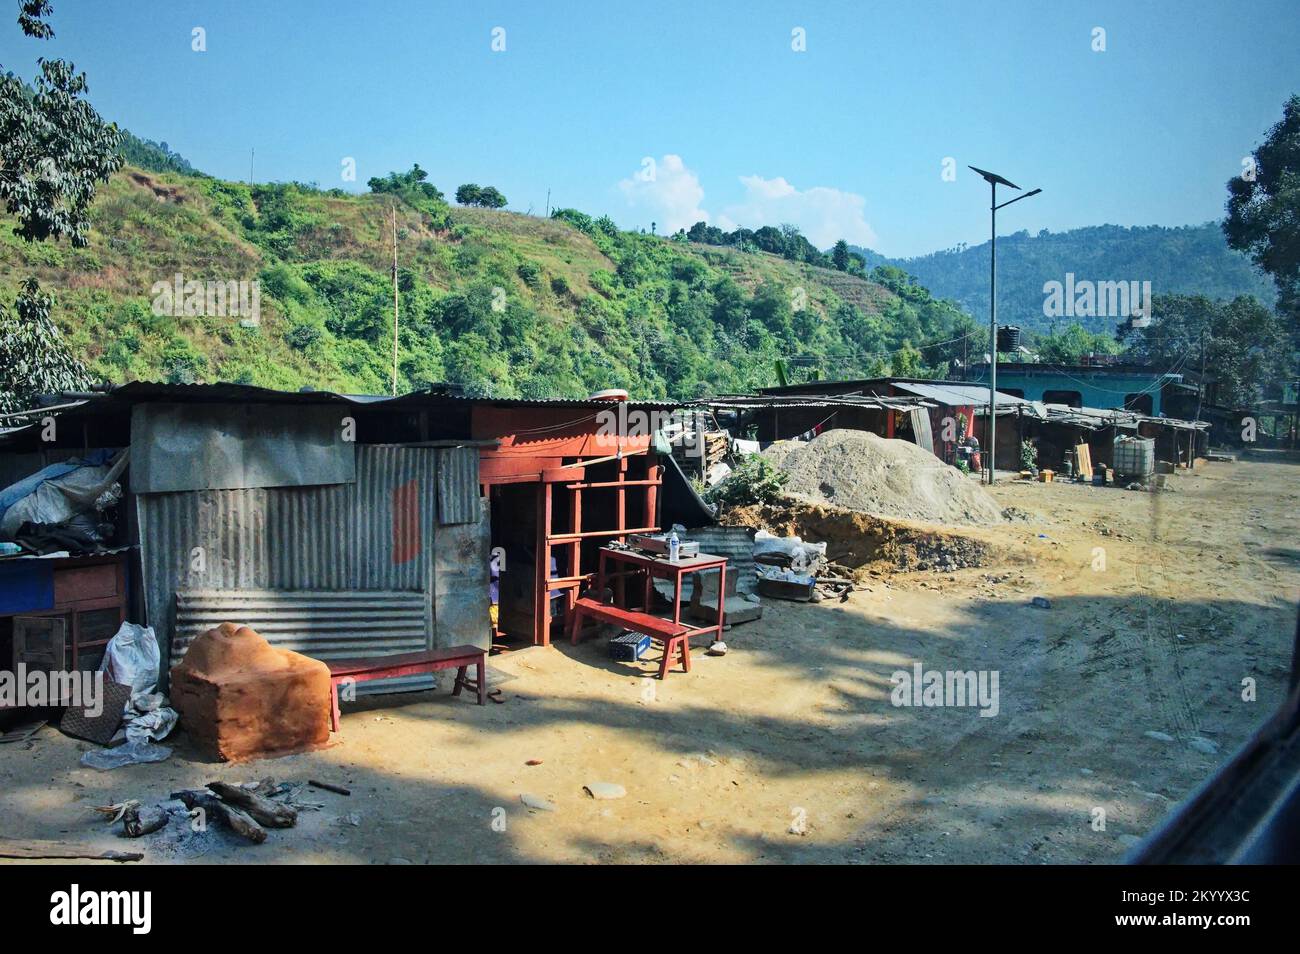 View from the bus window on the road in Nepal with small dilapidated houses Stock Photo